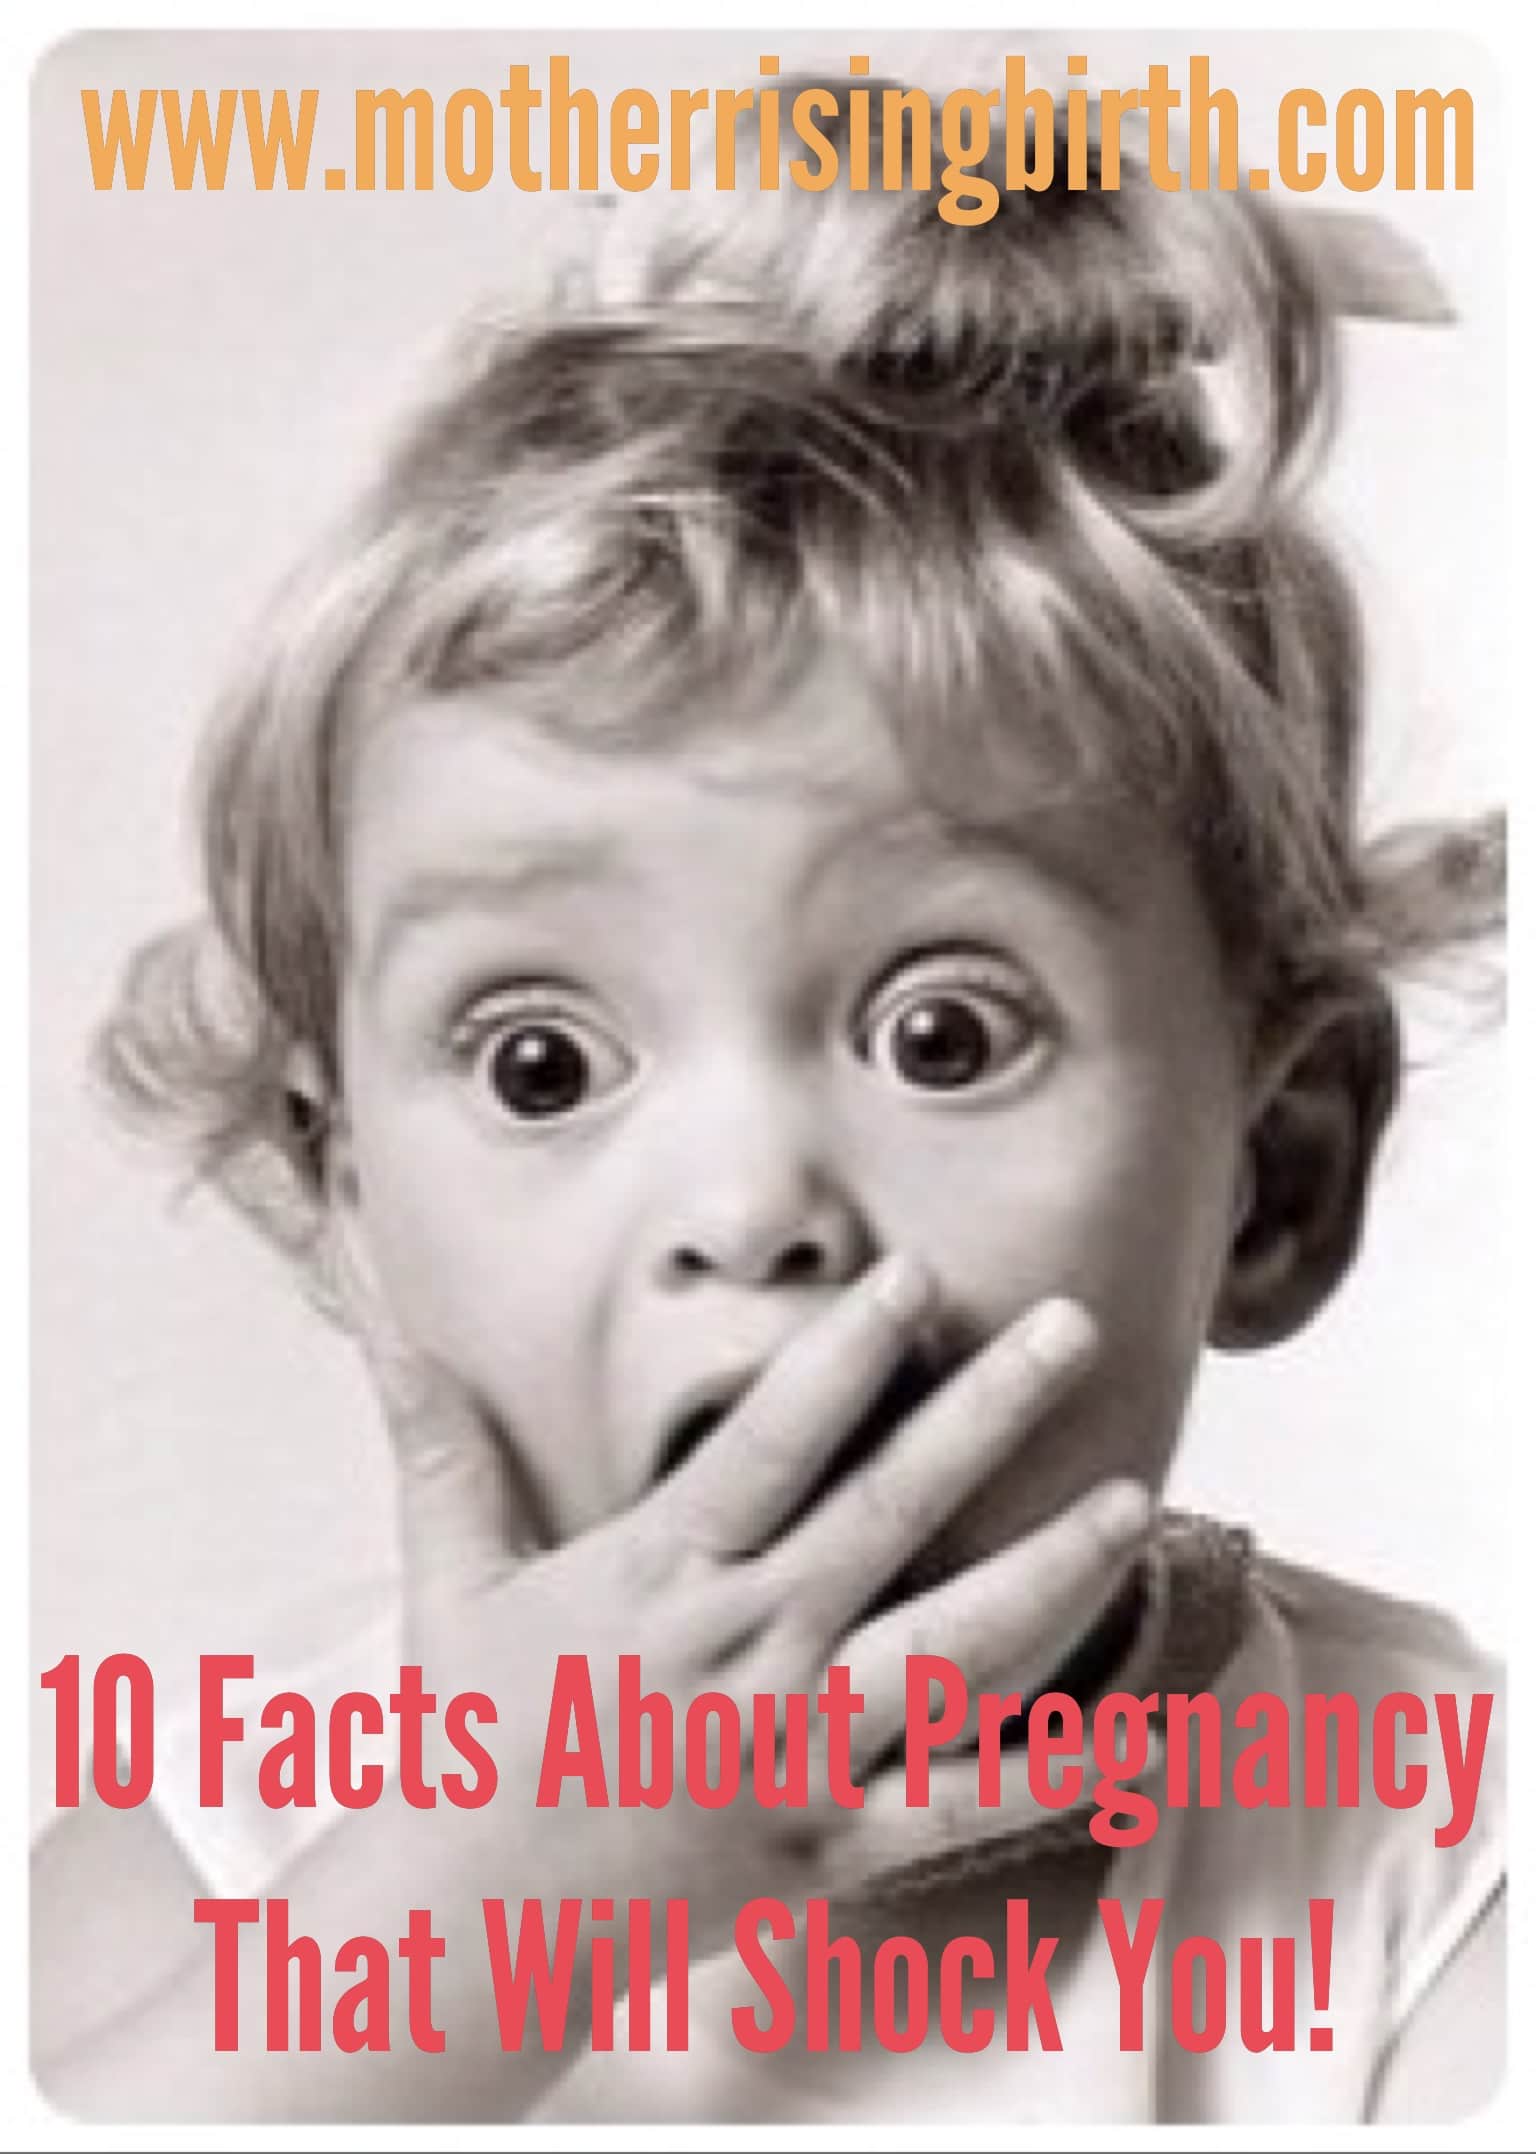 10 Facts About Pregnancy That Will Shock You | Mother Rising